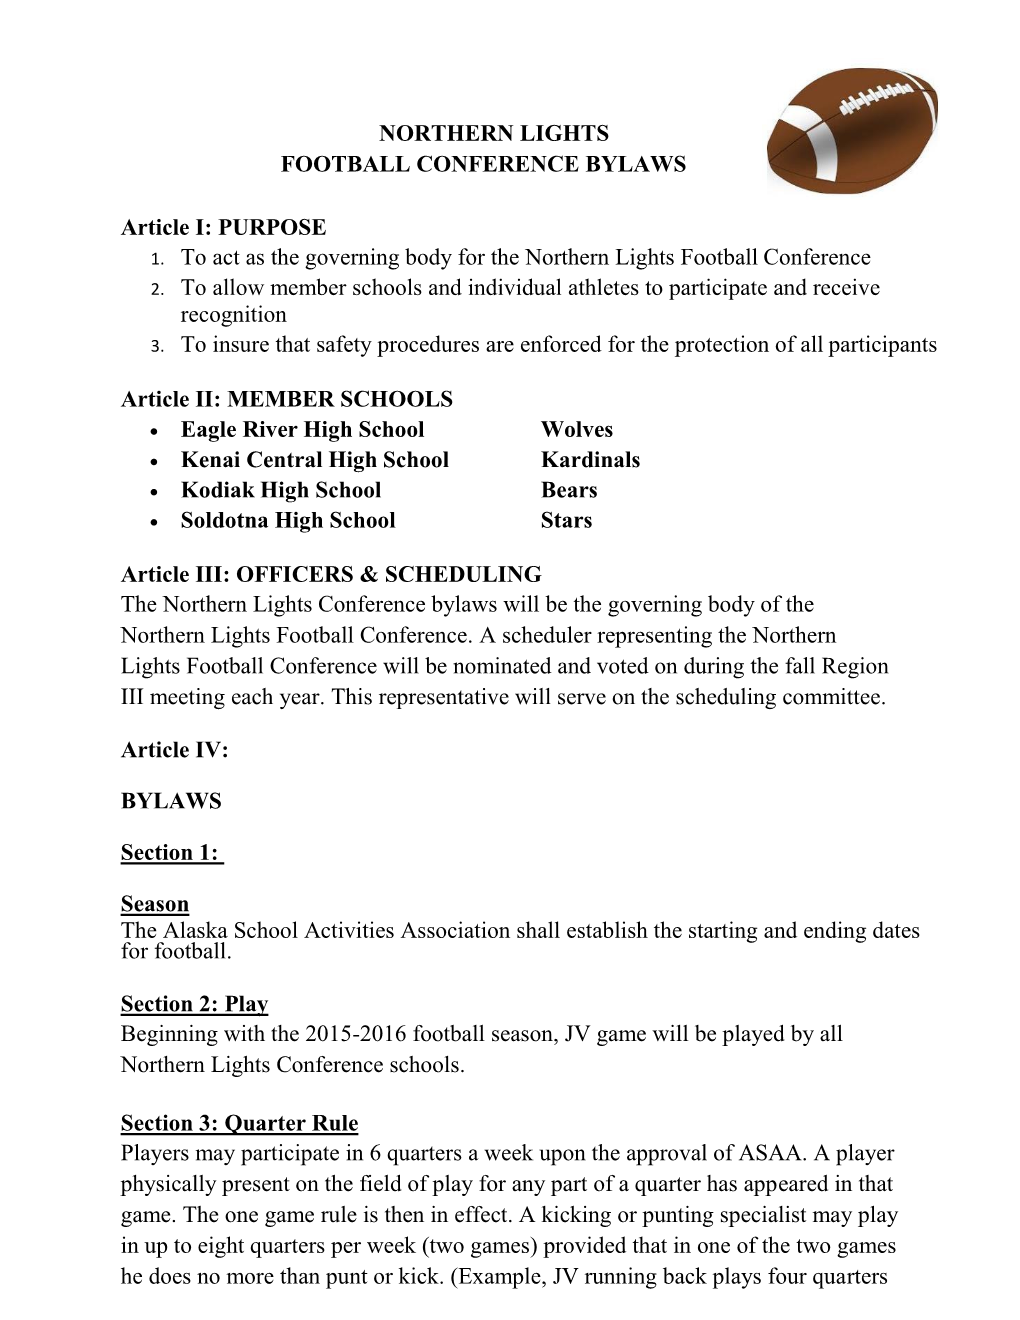 Northern Lights Football Conference Bylaws